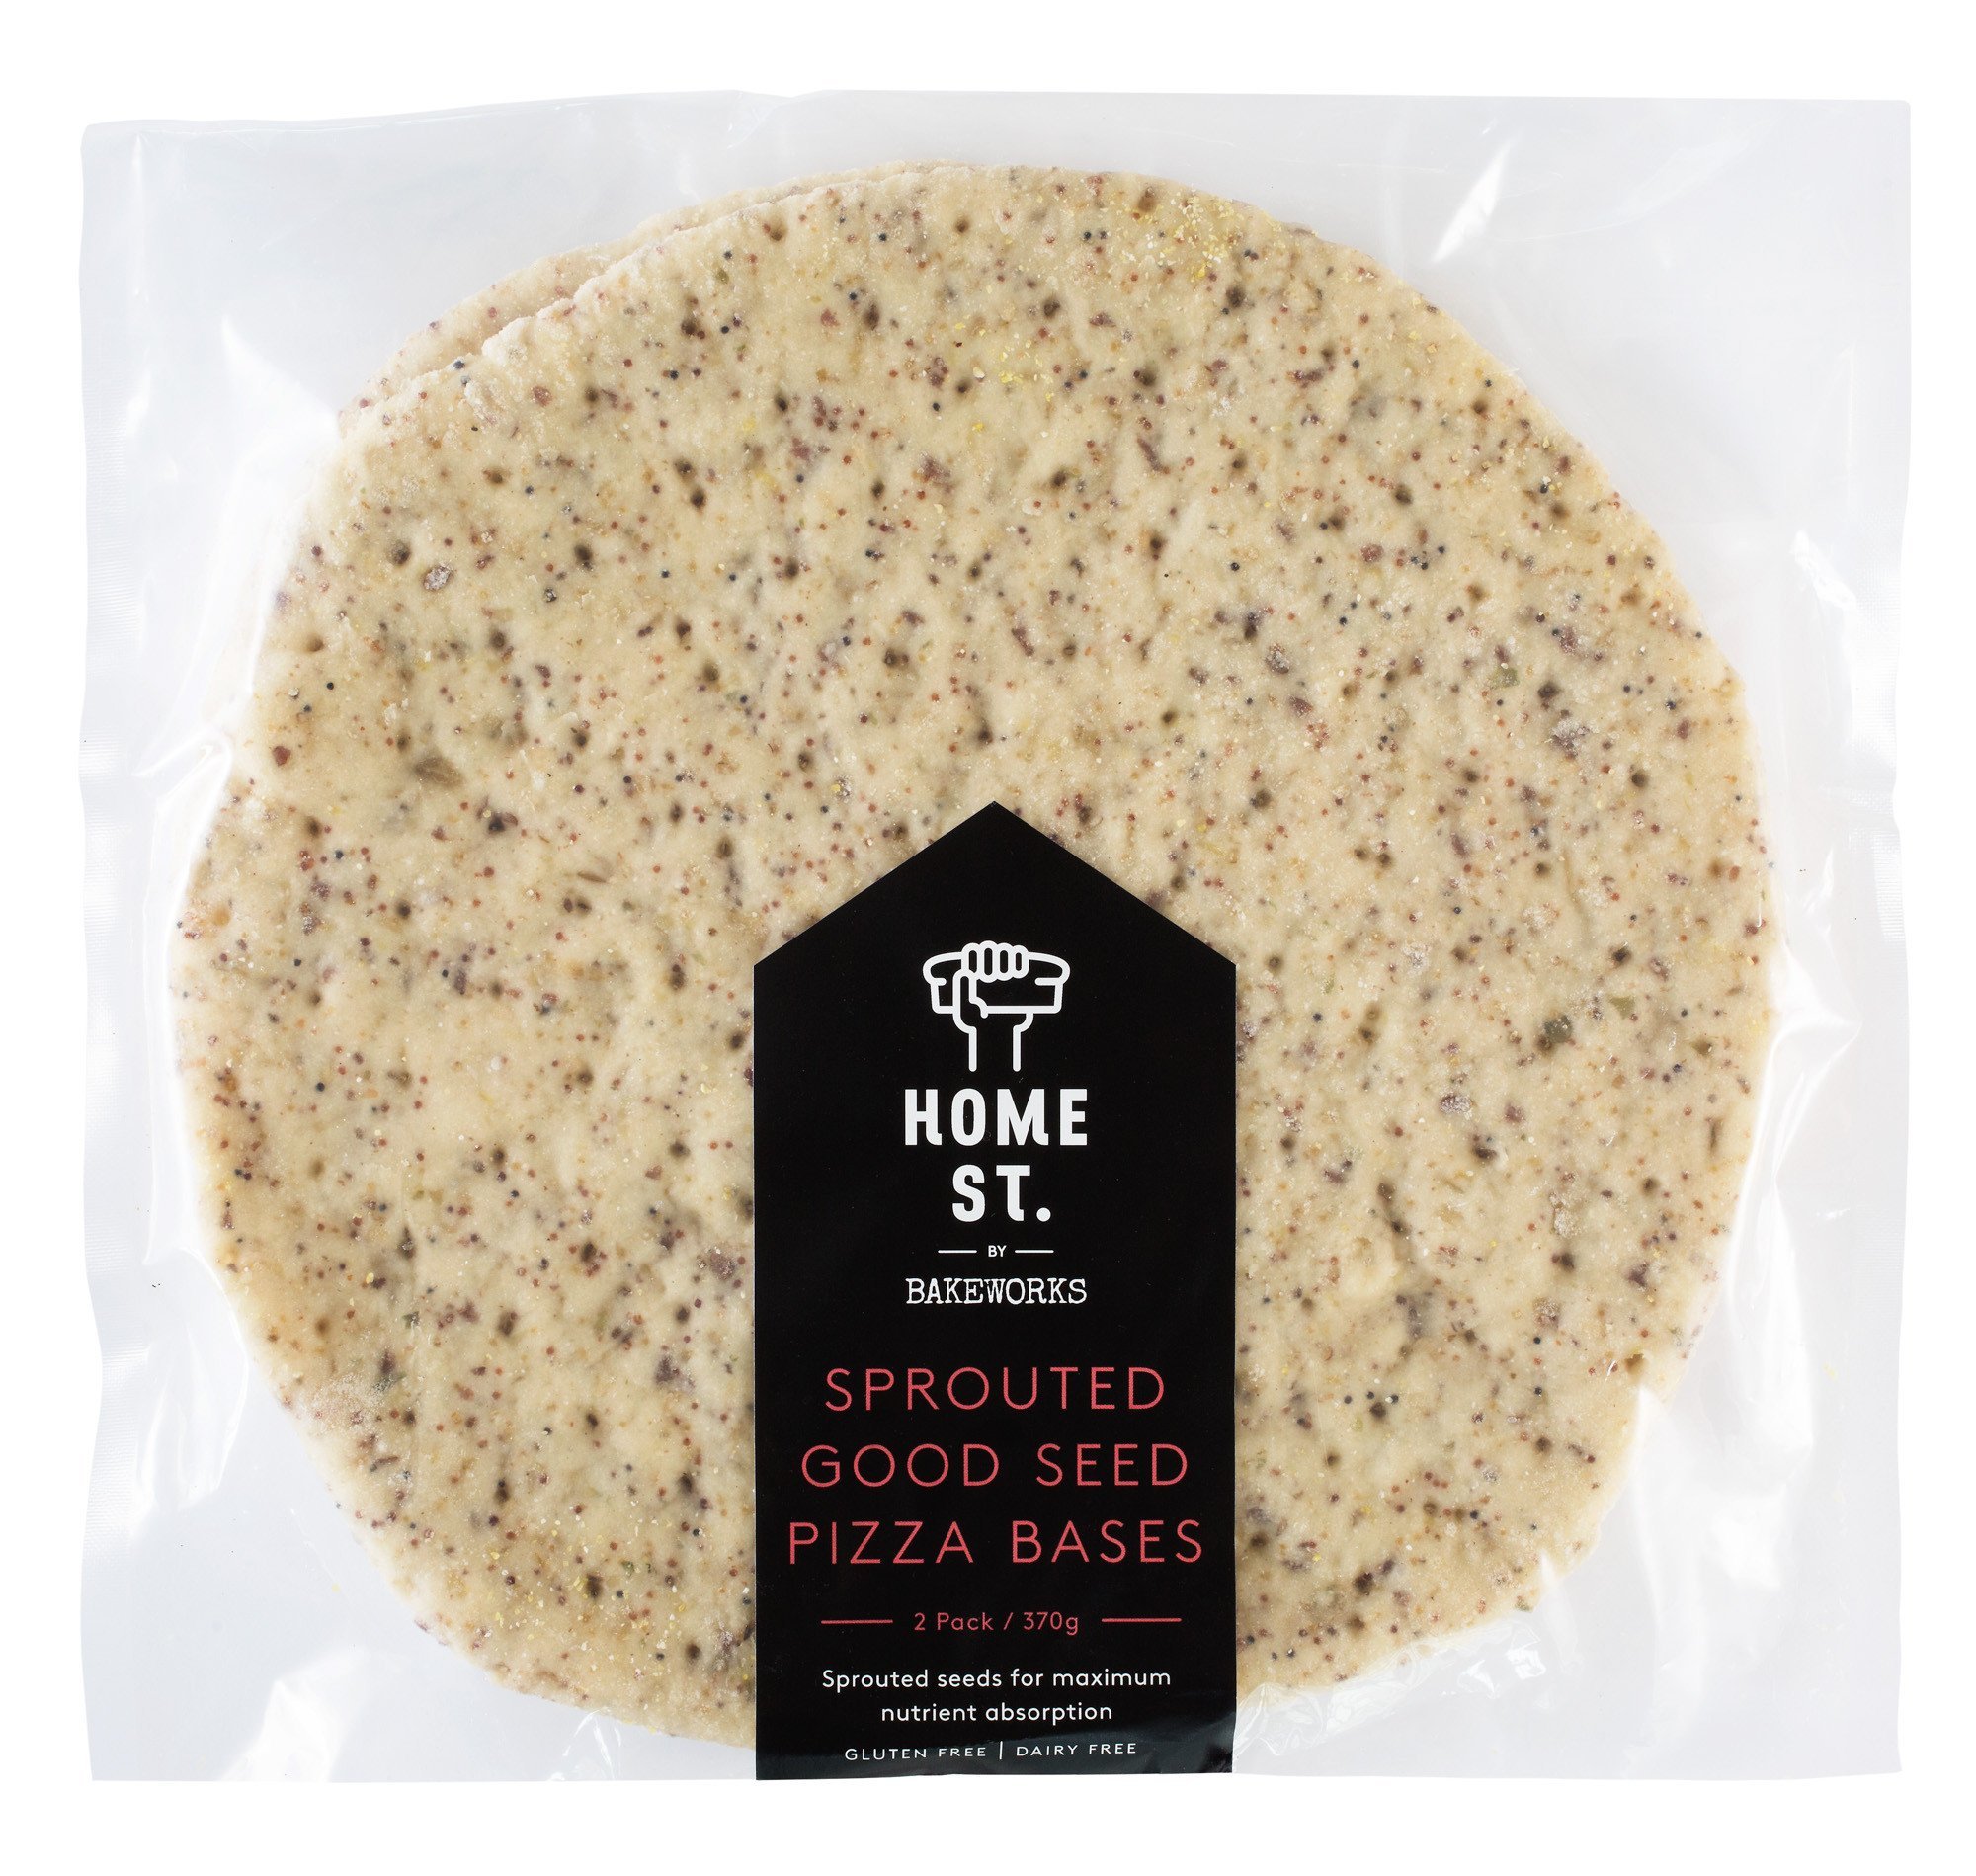 NZ Home St. Sprouted GF Pizza Bases